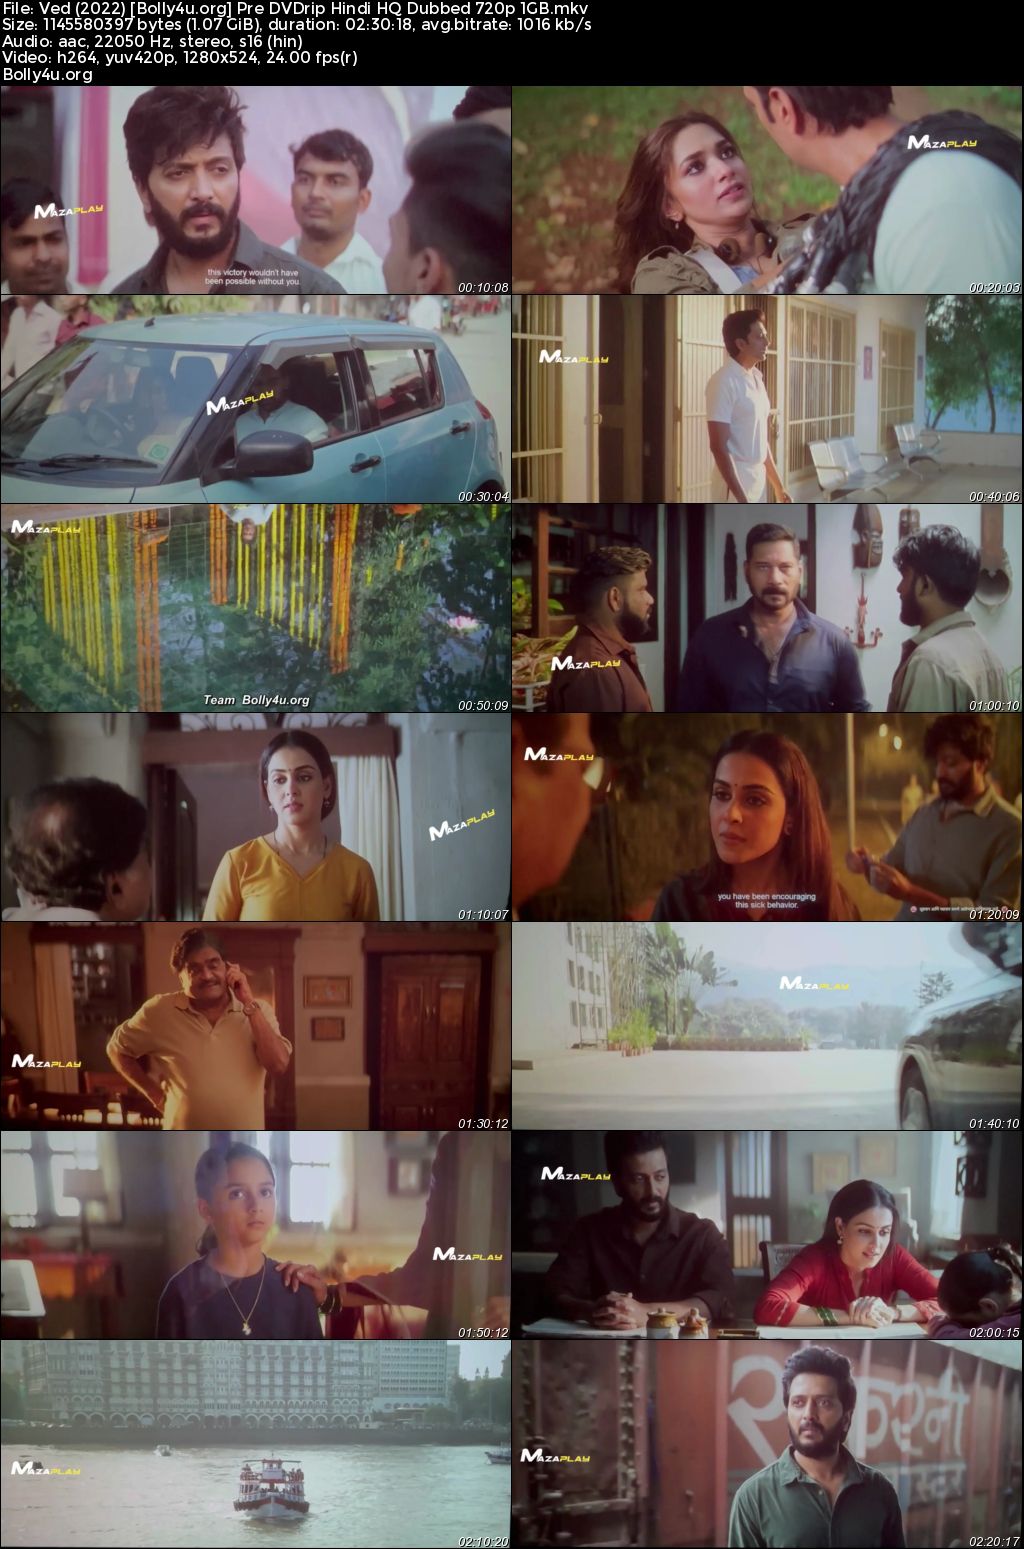 Ved 2022 Pre DVDRip Hindi HQ Dubbed Full Movie Download 1080p 720p 480p